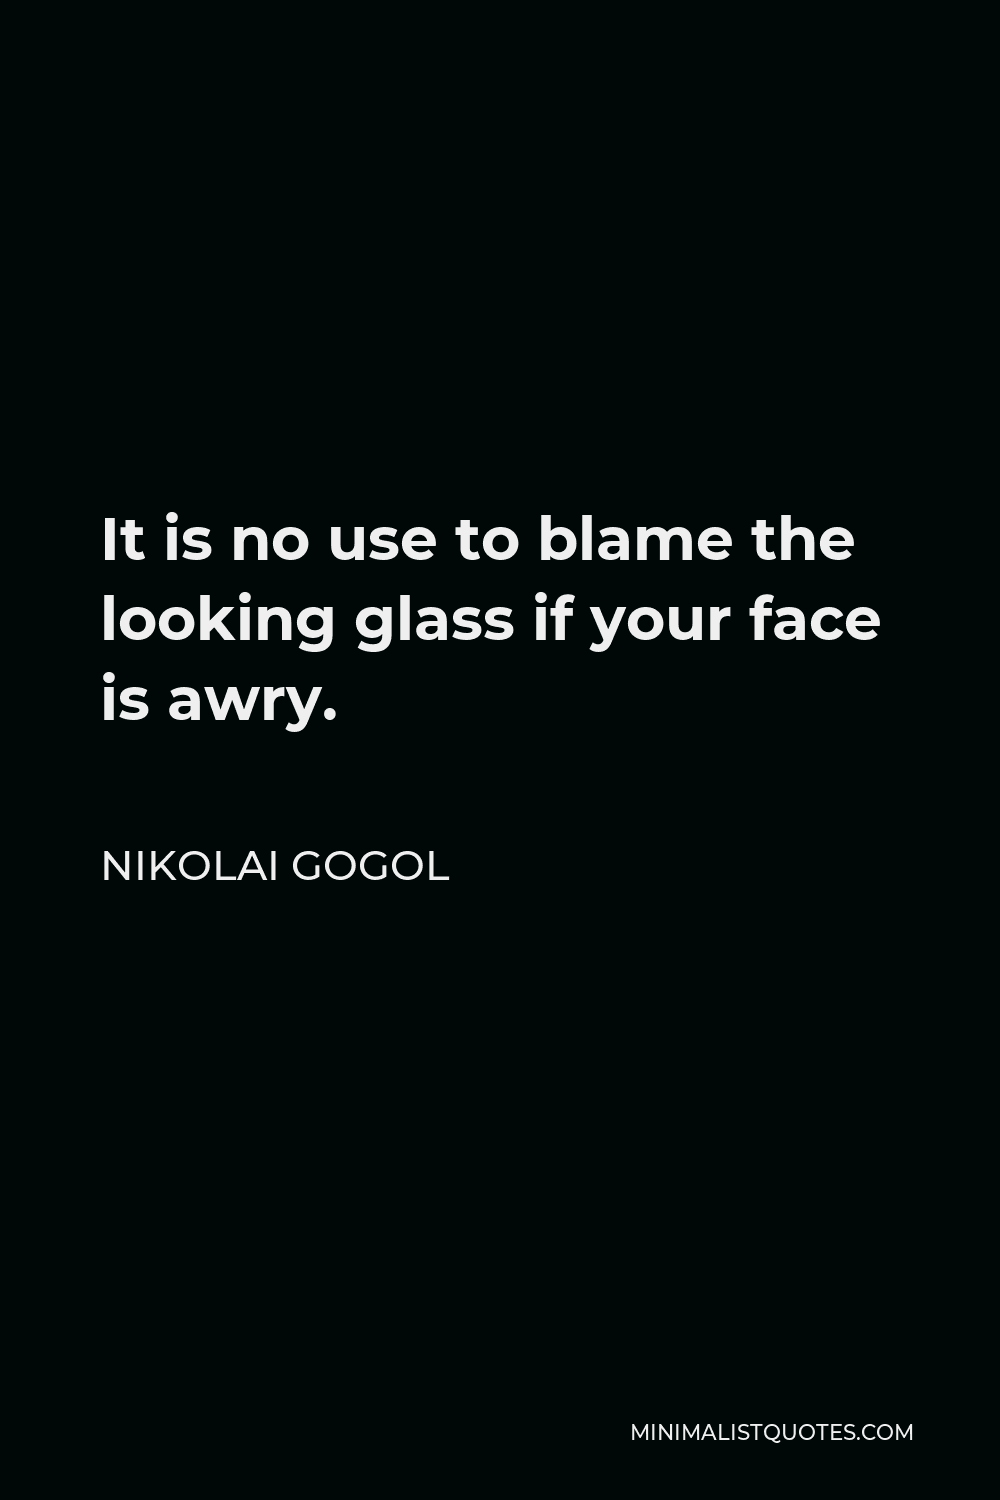 Nikolai Gogol Quote - It is no use to blame the looking glass if your face is awry.